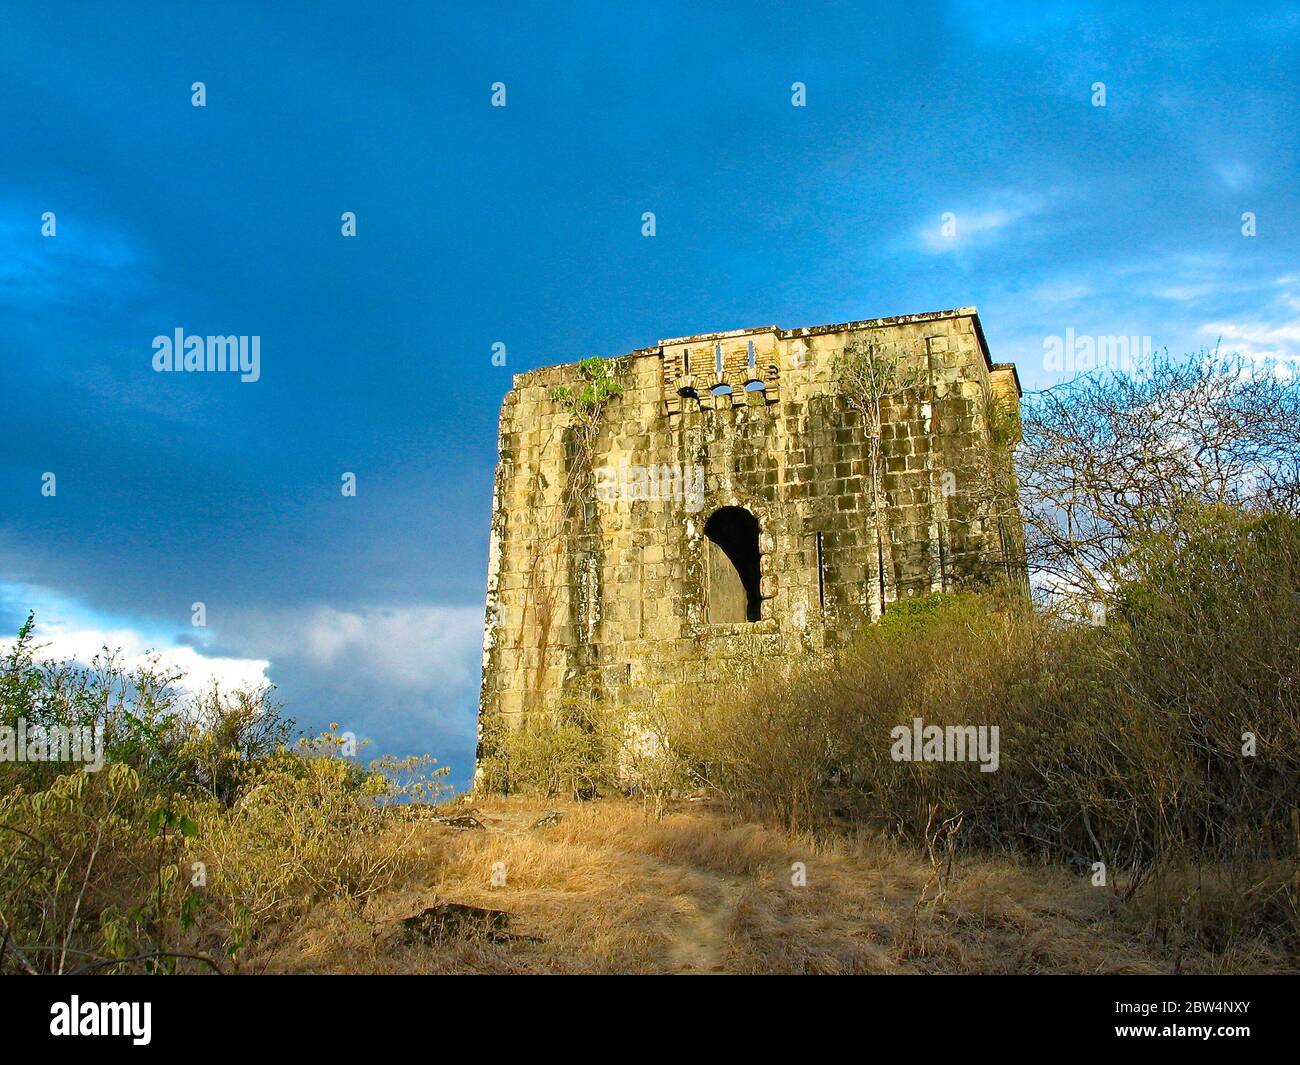 Ruins of an old tower on the hill, dark menacing sky background. Stock Photo